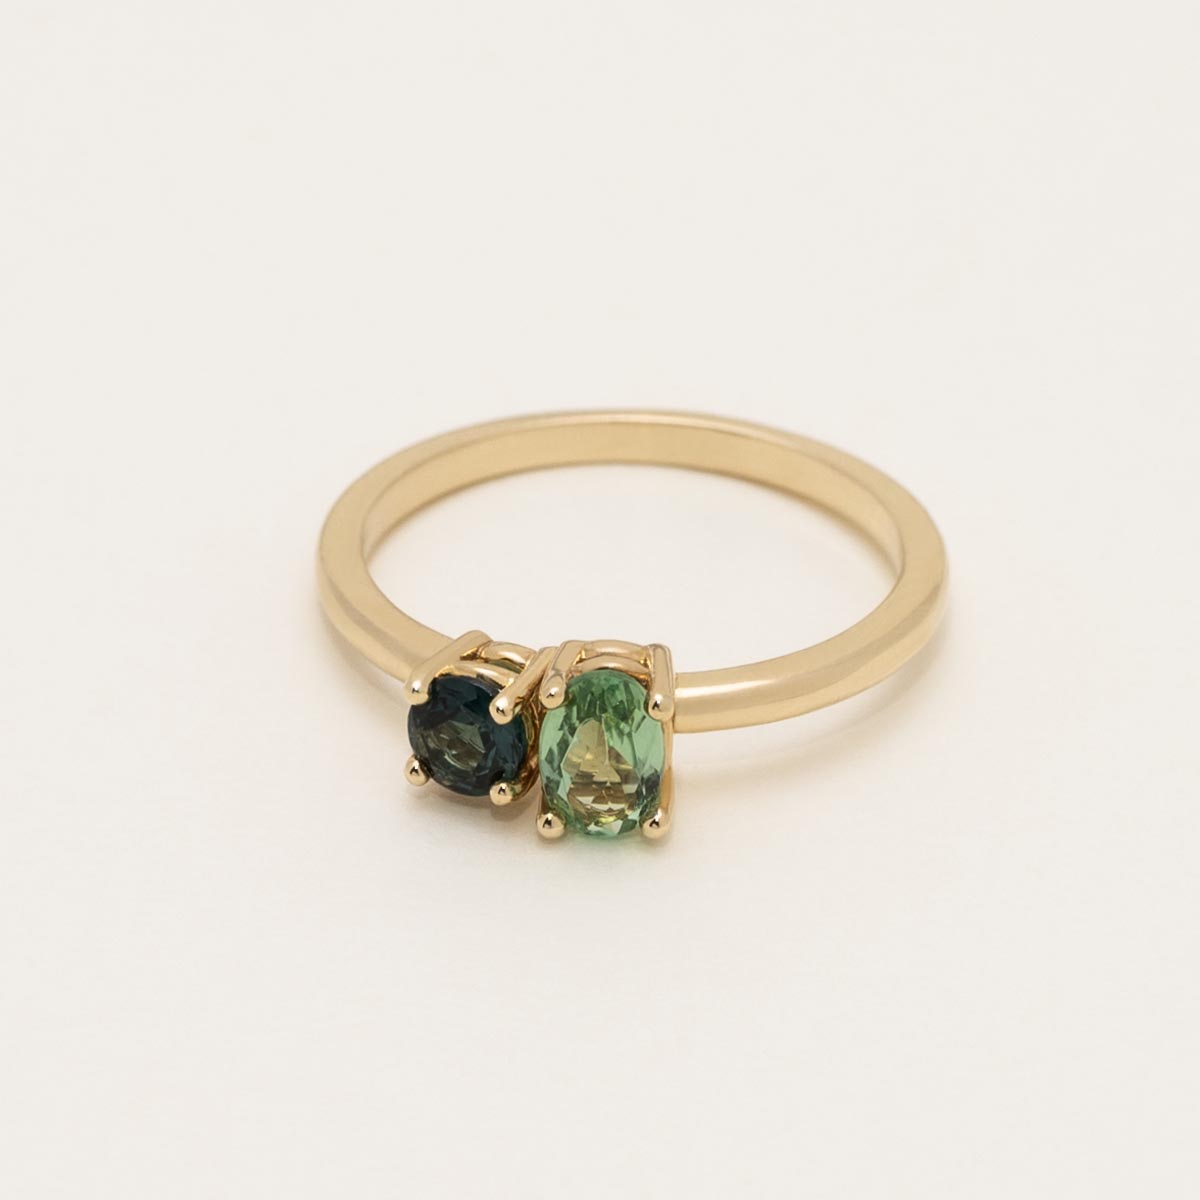 Maine Green and Indicolite Tourmaline Ring in 14kt Yellow Gold